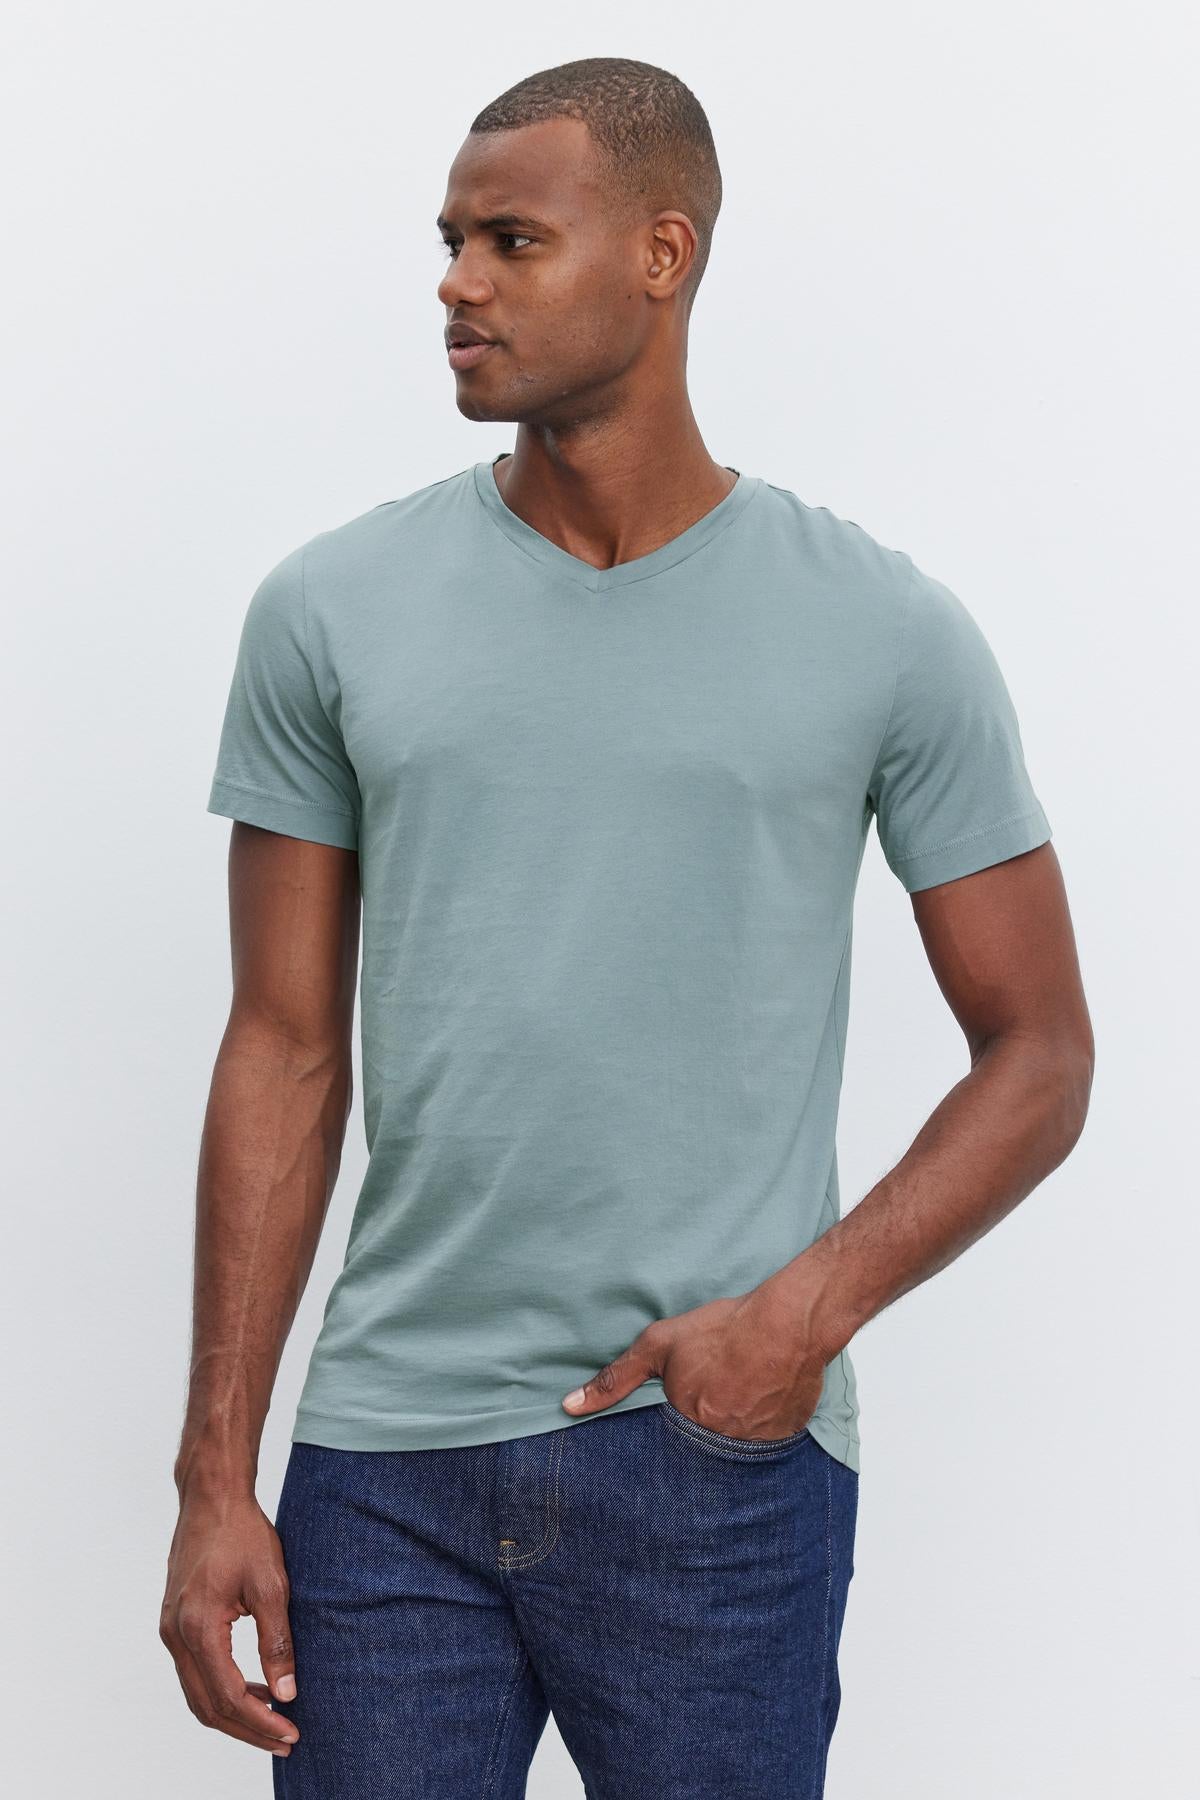 A man wearing a light green SAMSEN TEE made of whisper cotton knit by Velvet by Graham & Spencer and dark blue jeans stands against a plain light-colored background, looking to the side. This ensemble showcases stylish everyday wear with its comfortable fit and modern v-neckline.-37409982644417